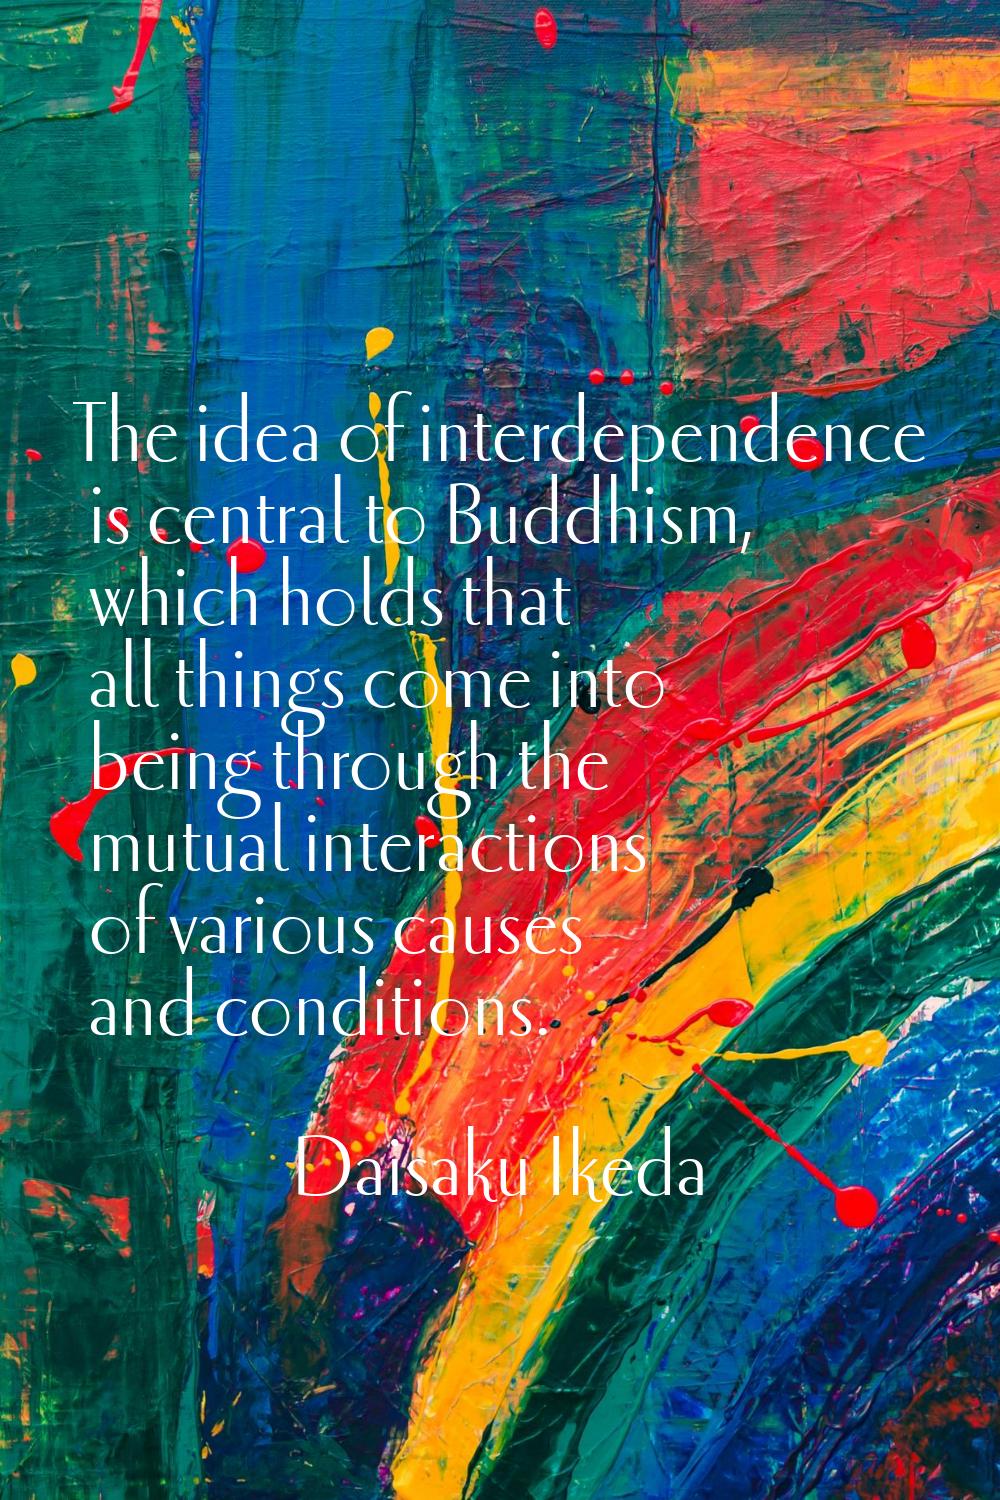 The idea of interdependence is central to Buddhism, which holds that all things come into being thr